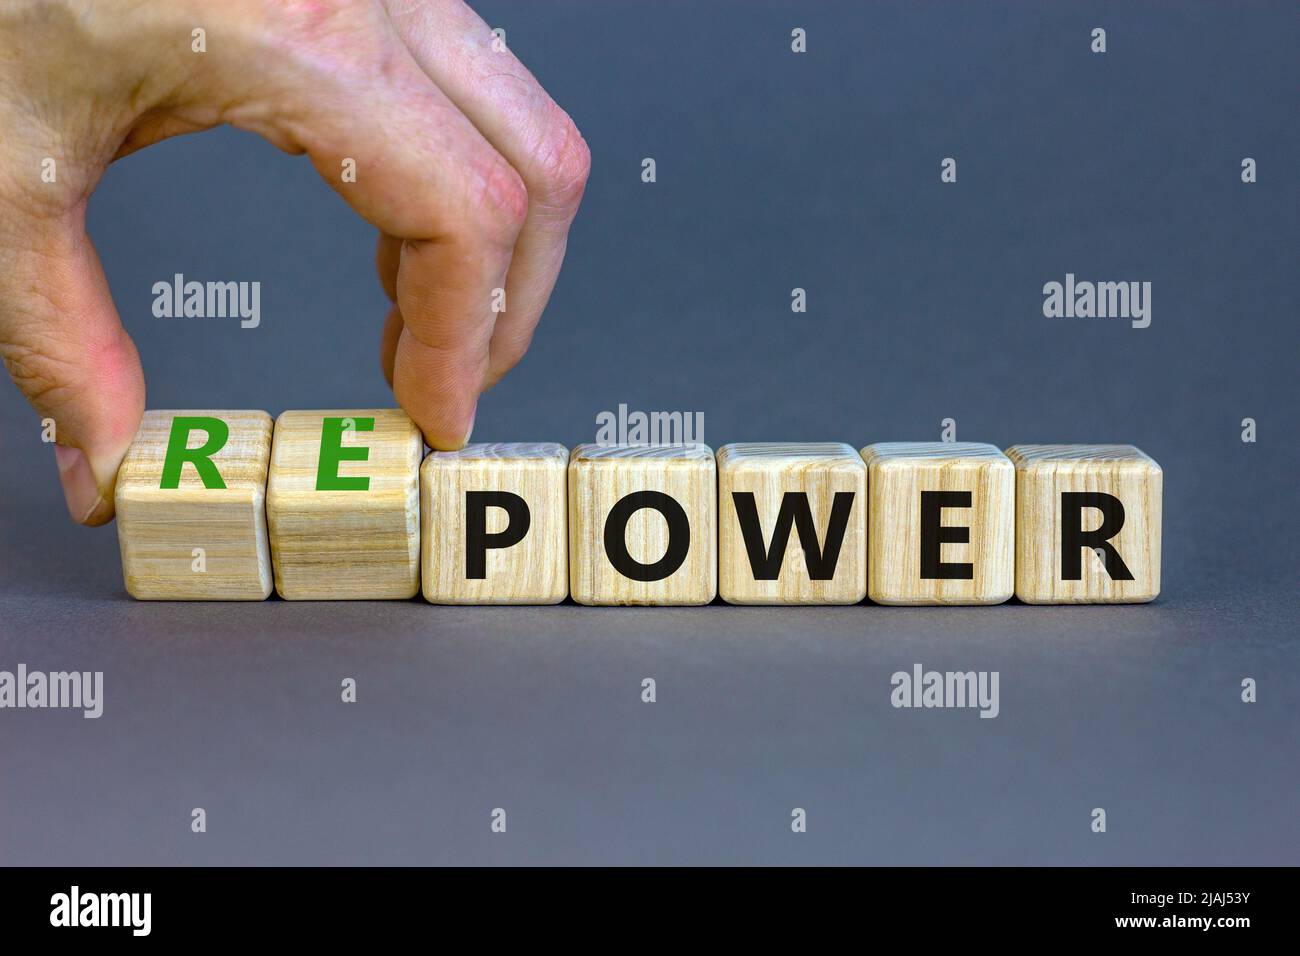 Power or repower symbol. Businessman turns wooden cubes and changes concept words Power to Repower. Beautiful grey table grey background. Business eco Stock Photo